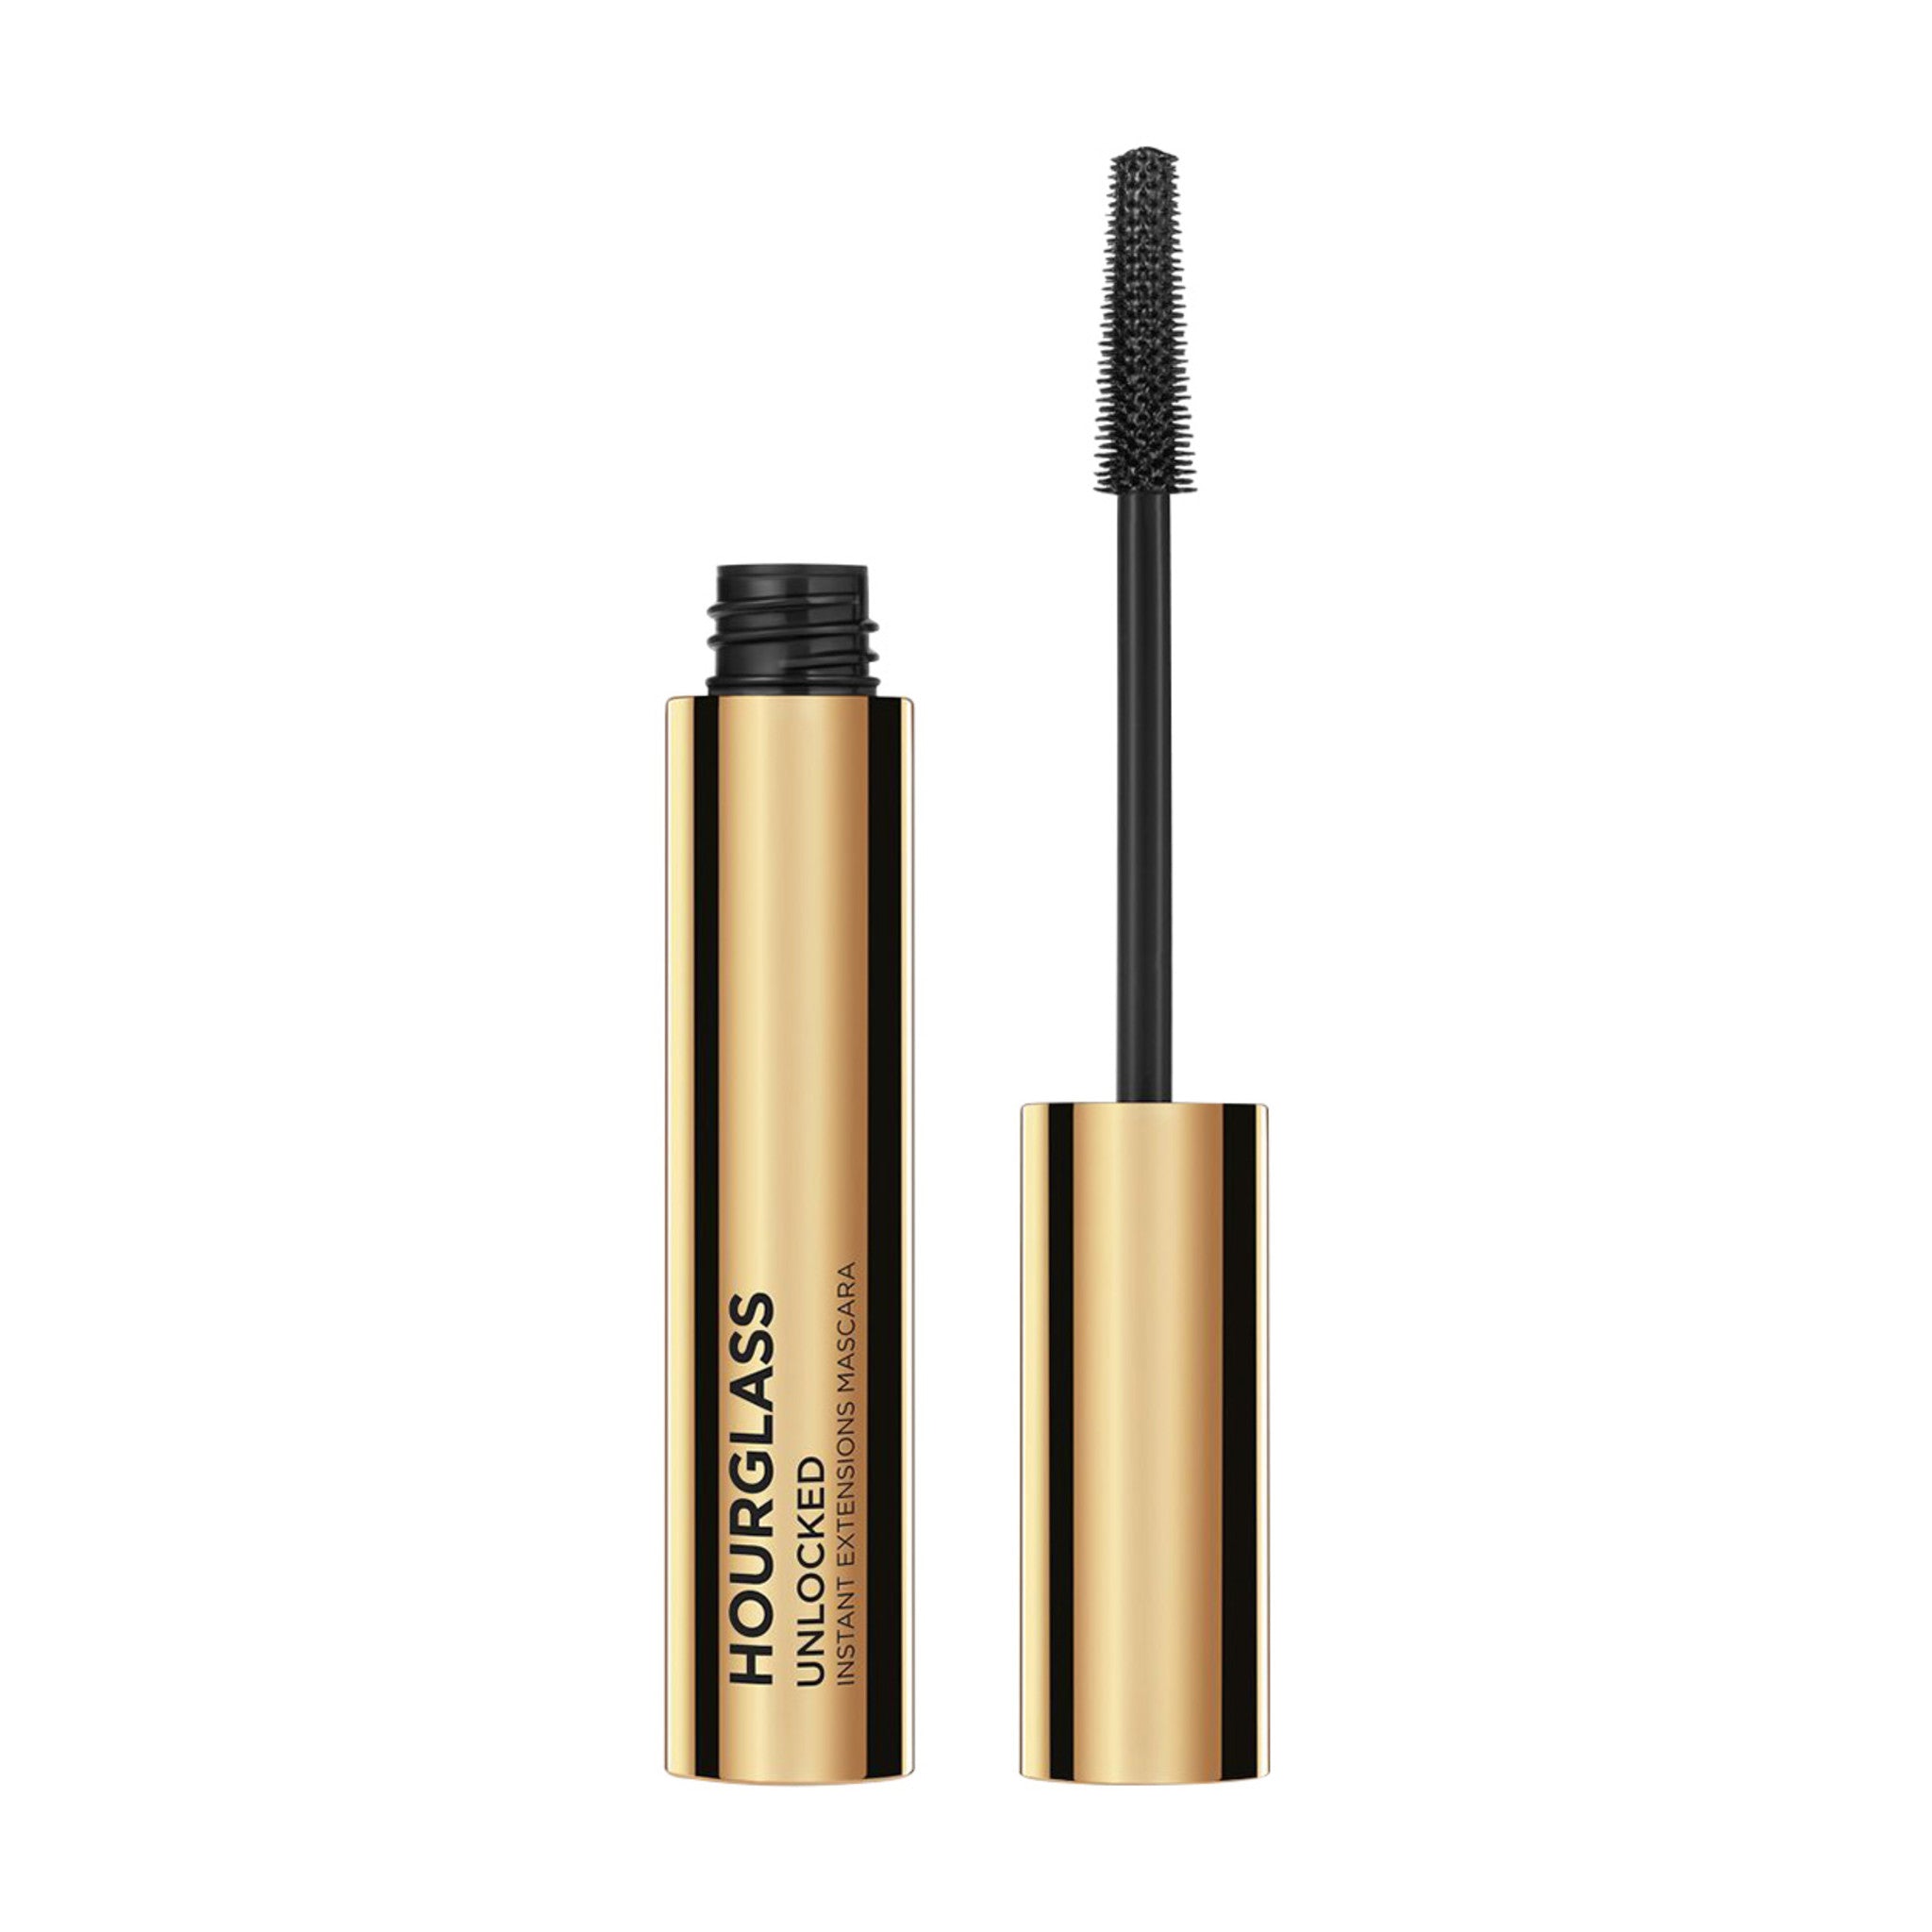 Hourglass Unlocked Instant Extensions Mascara Size variant: 0.35 oz main image.